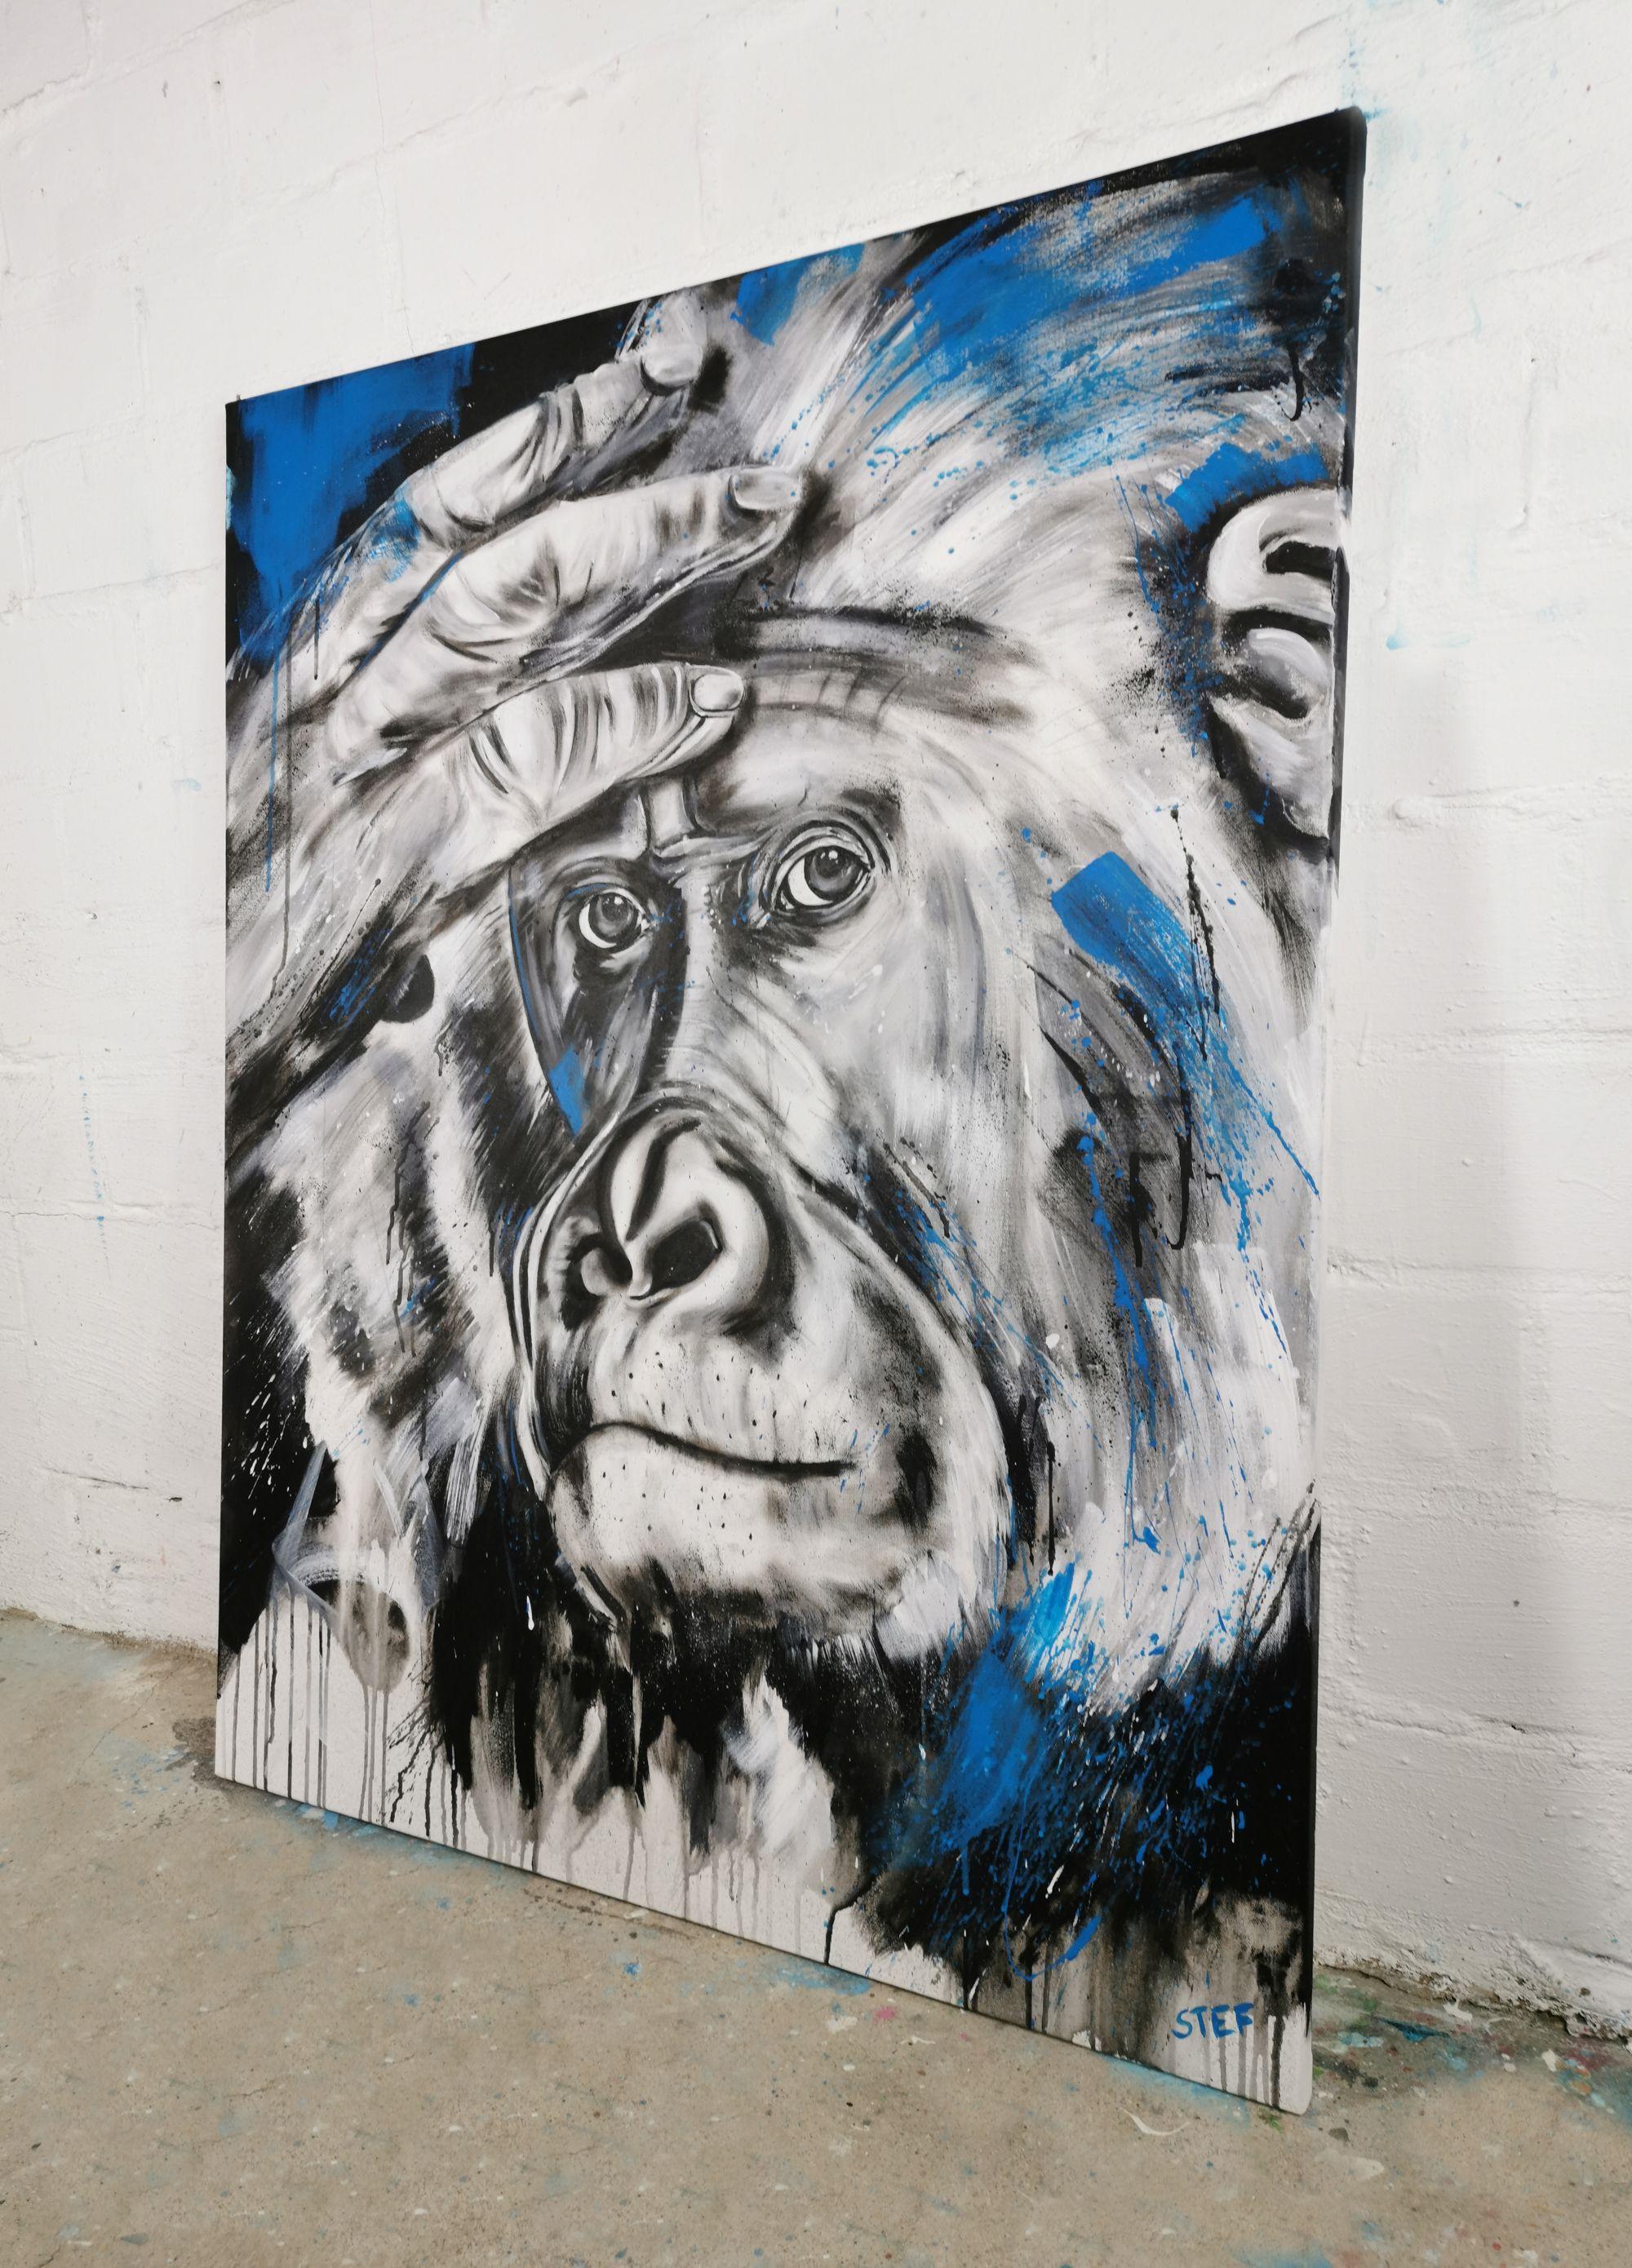   GORILLA #2' is an expressive painting of a close up Gorilla head.    Splashing Colors in black and blue on canvas.    80 x 100 cm    ************************************************************************************  â€žGorillas are the largest